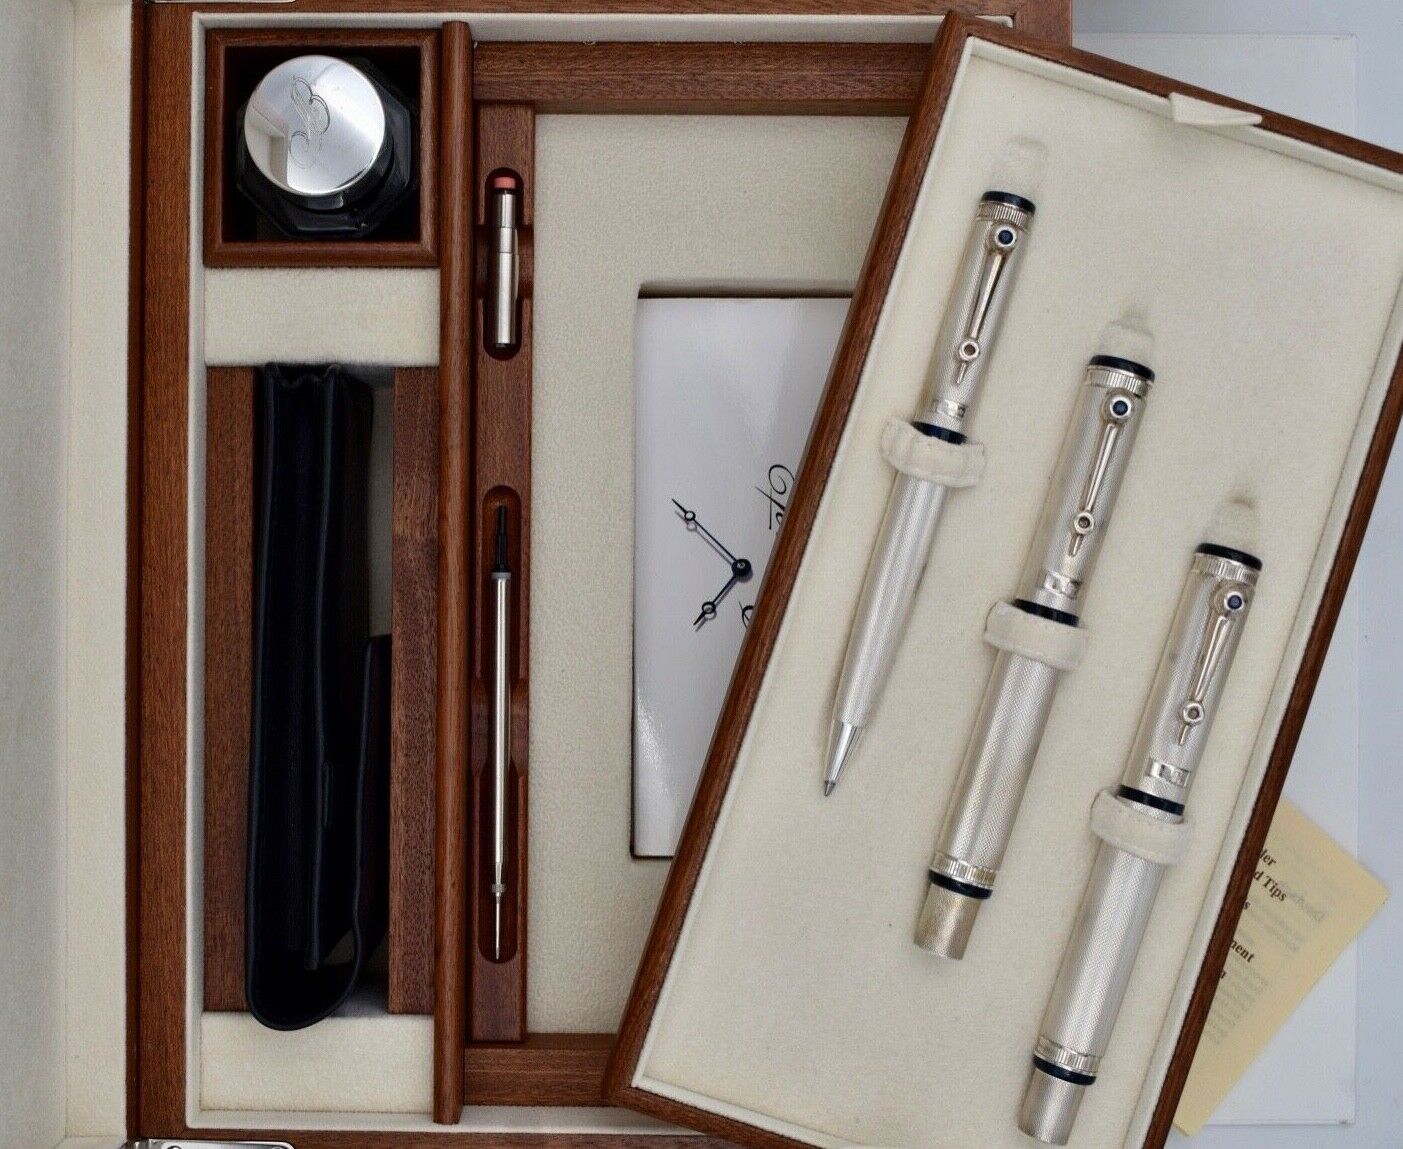 MONTEGRAPPA for BREGUET Classique Set of 3 Limited Edition Pens FP RB BP #1271 M